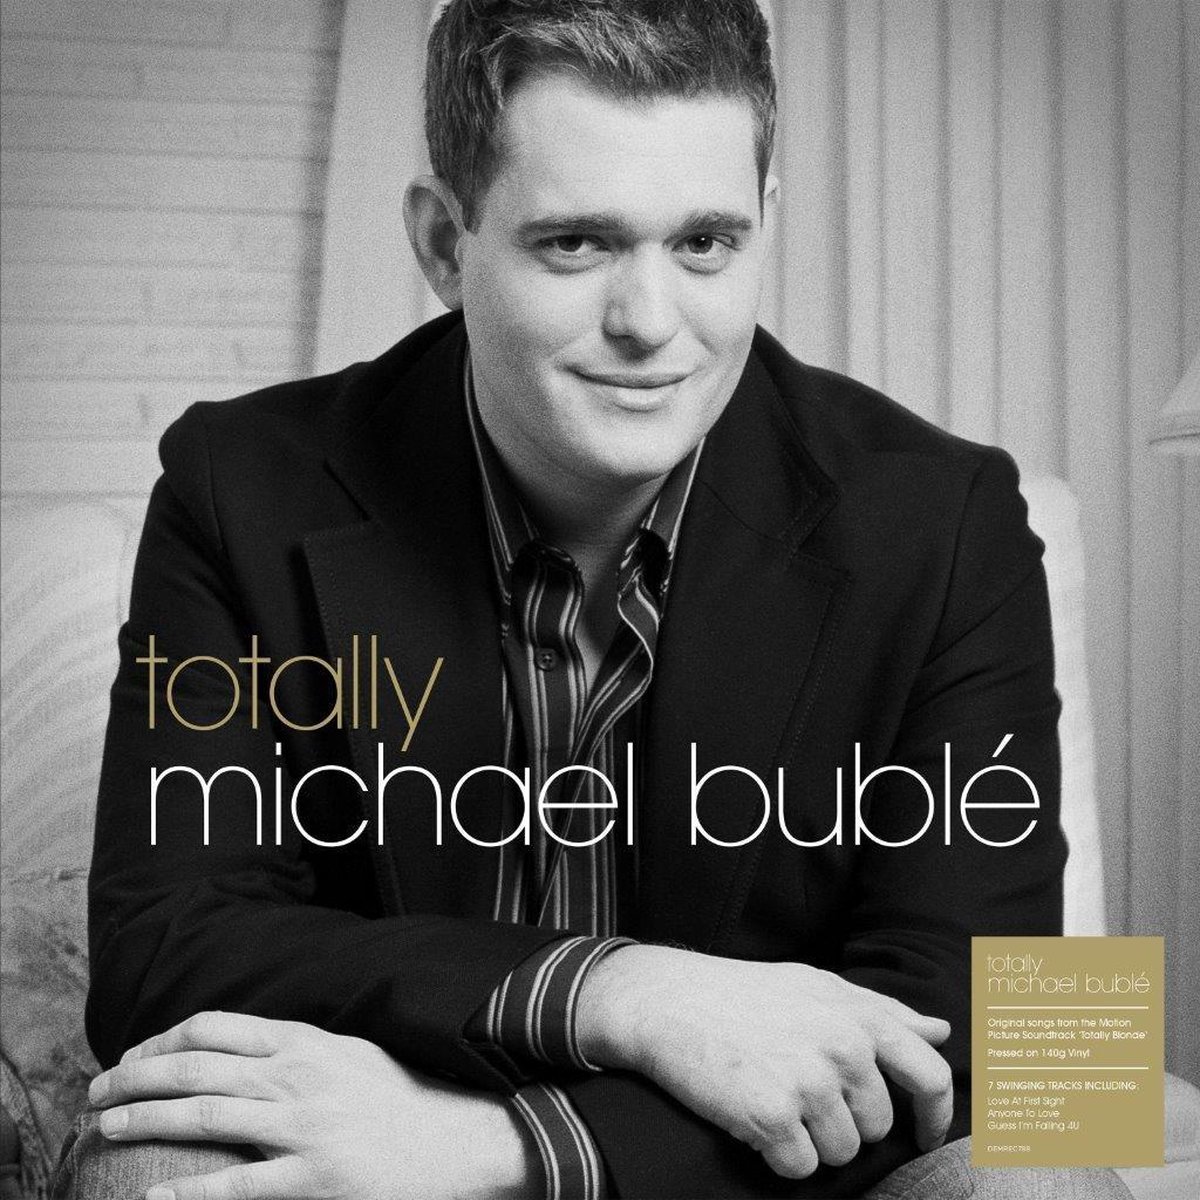 Totally - Michael Bublé